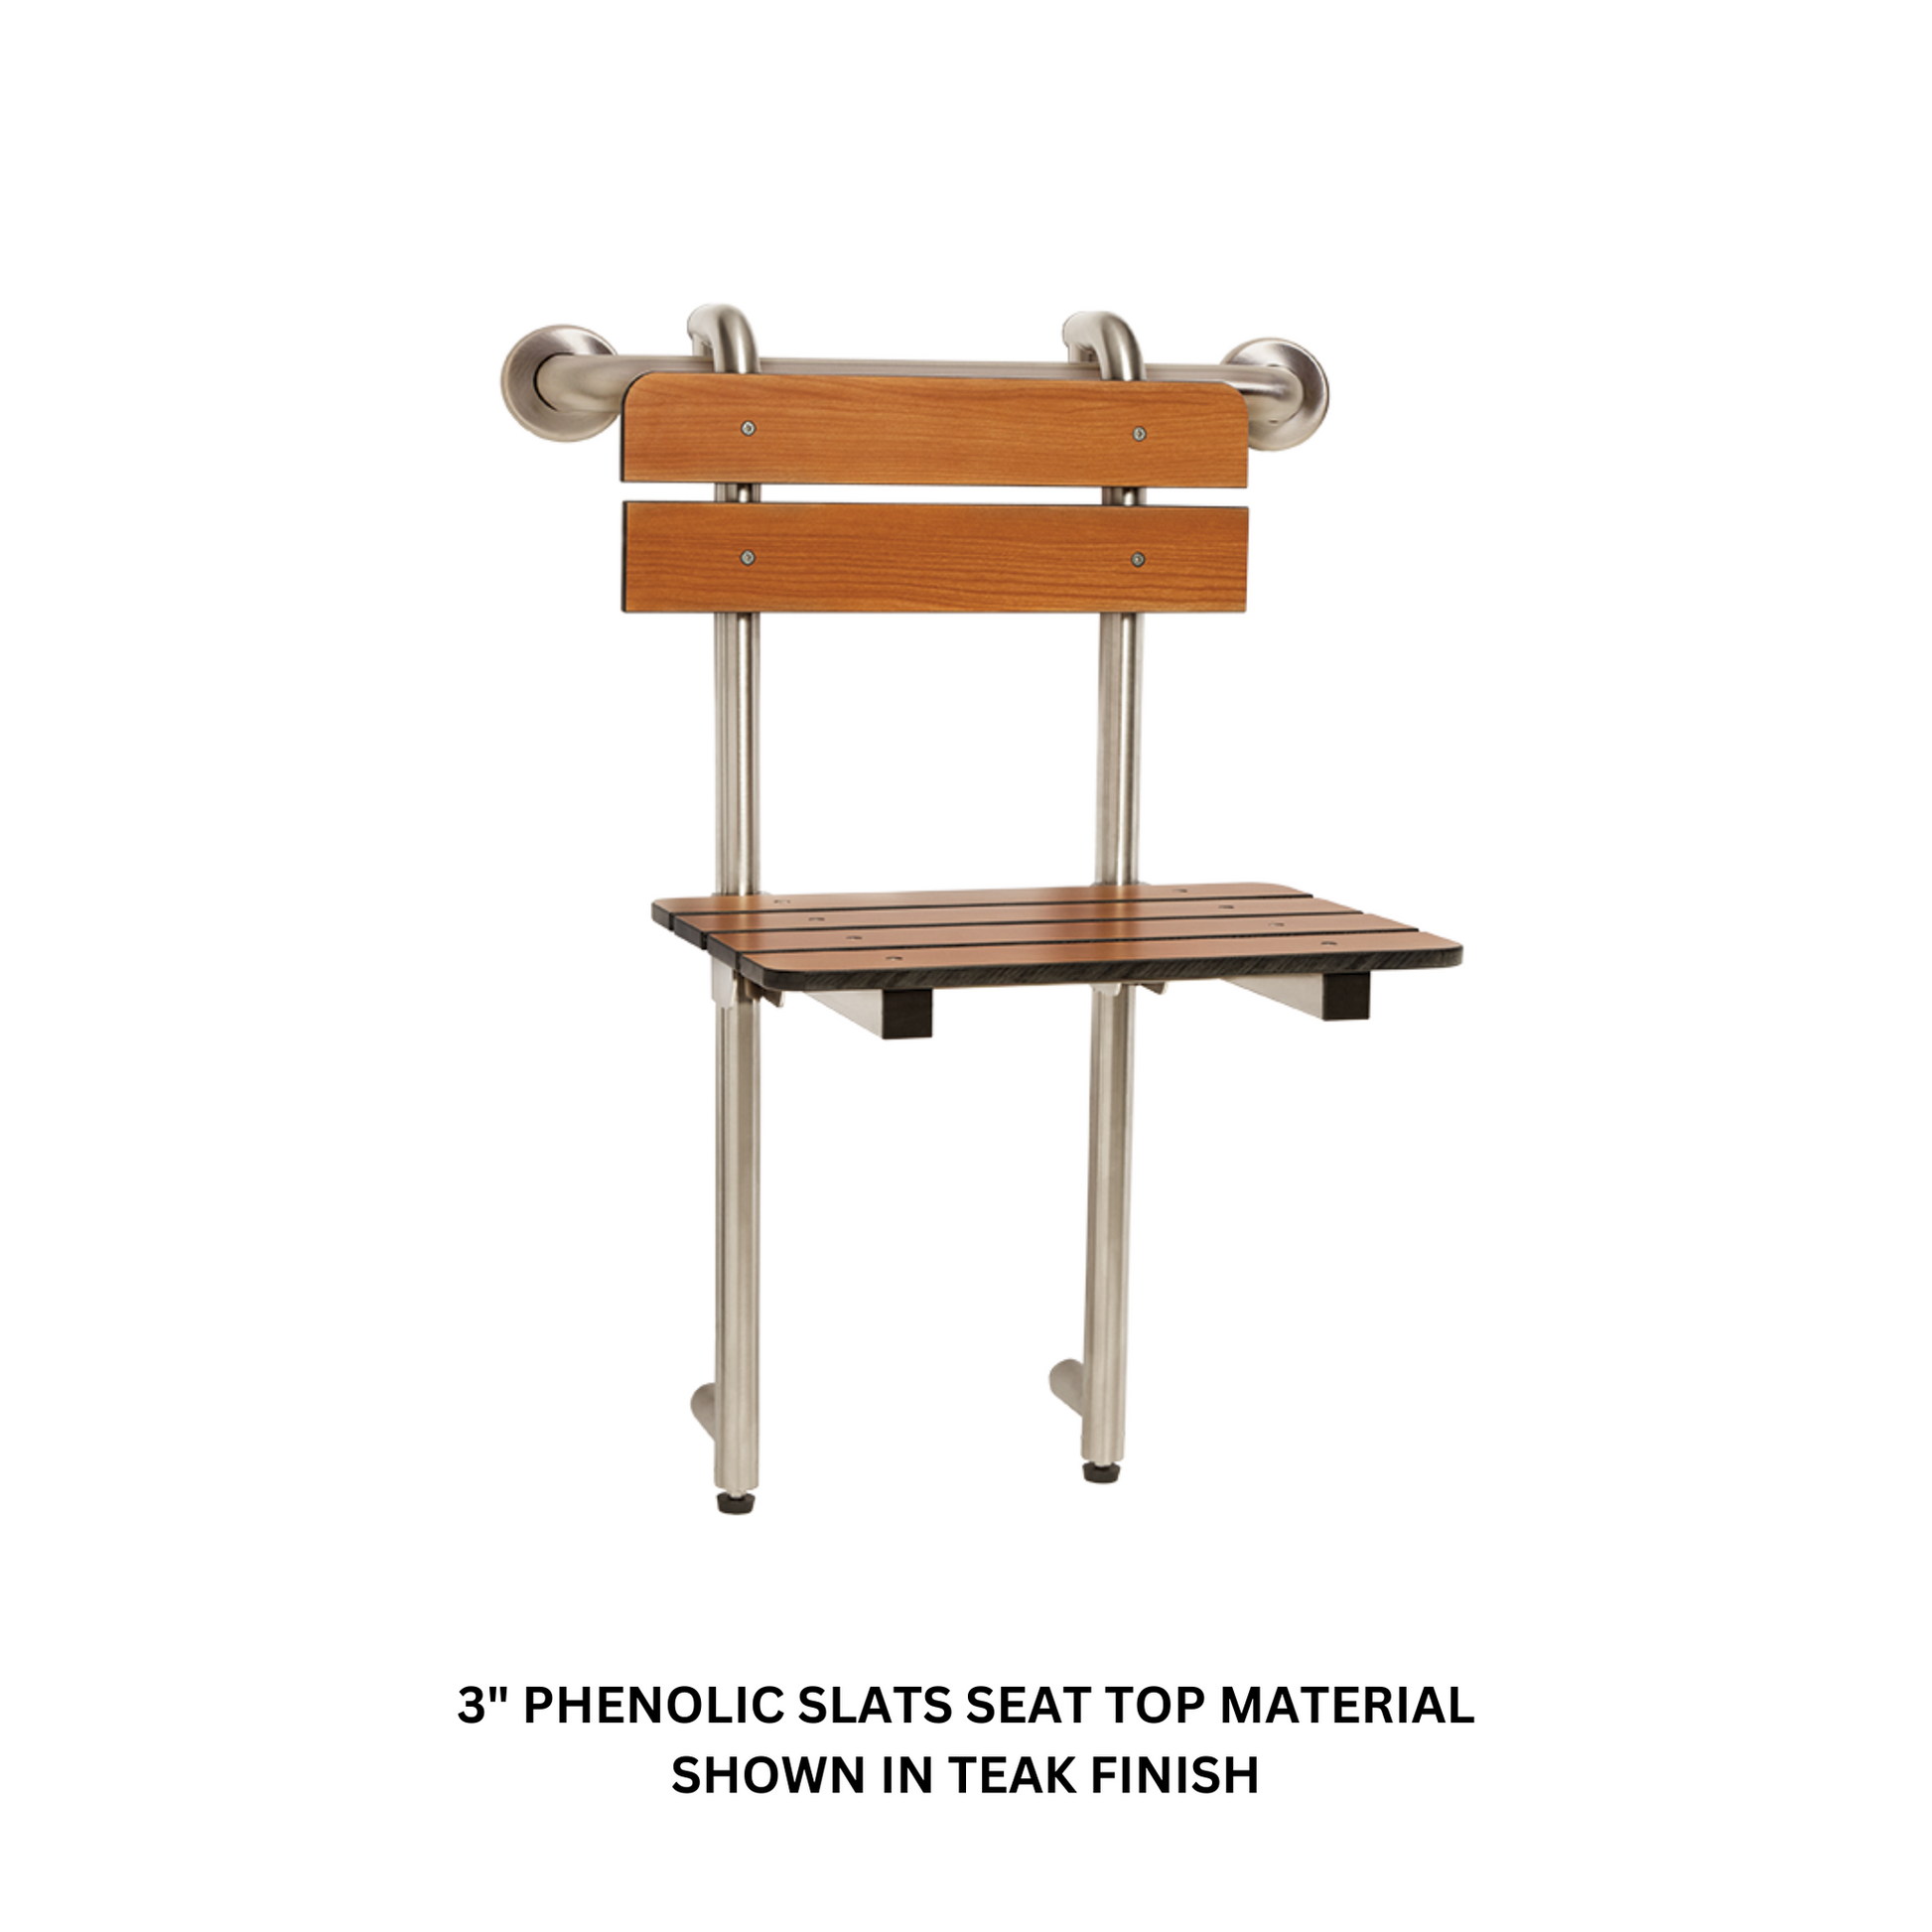 Seachrome Signature Lifestyle & Wellness Series 18" Aged Ash 3" Phenolic Slats Profile Bench Seat and Grab Bar Hung With Backrest and Legs